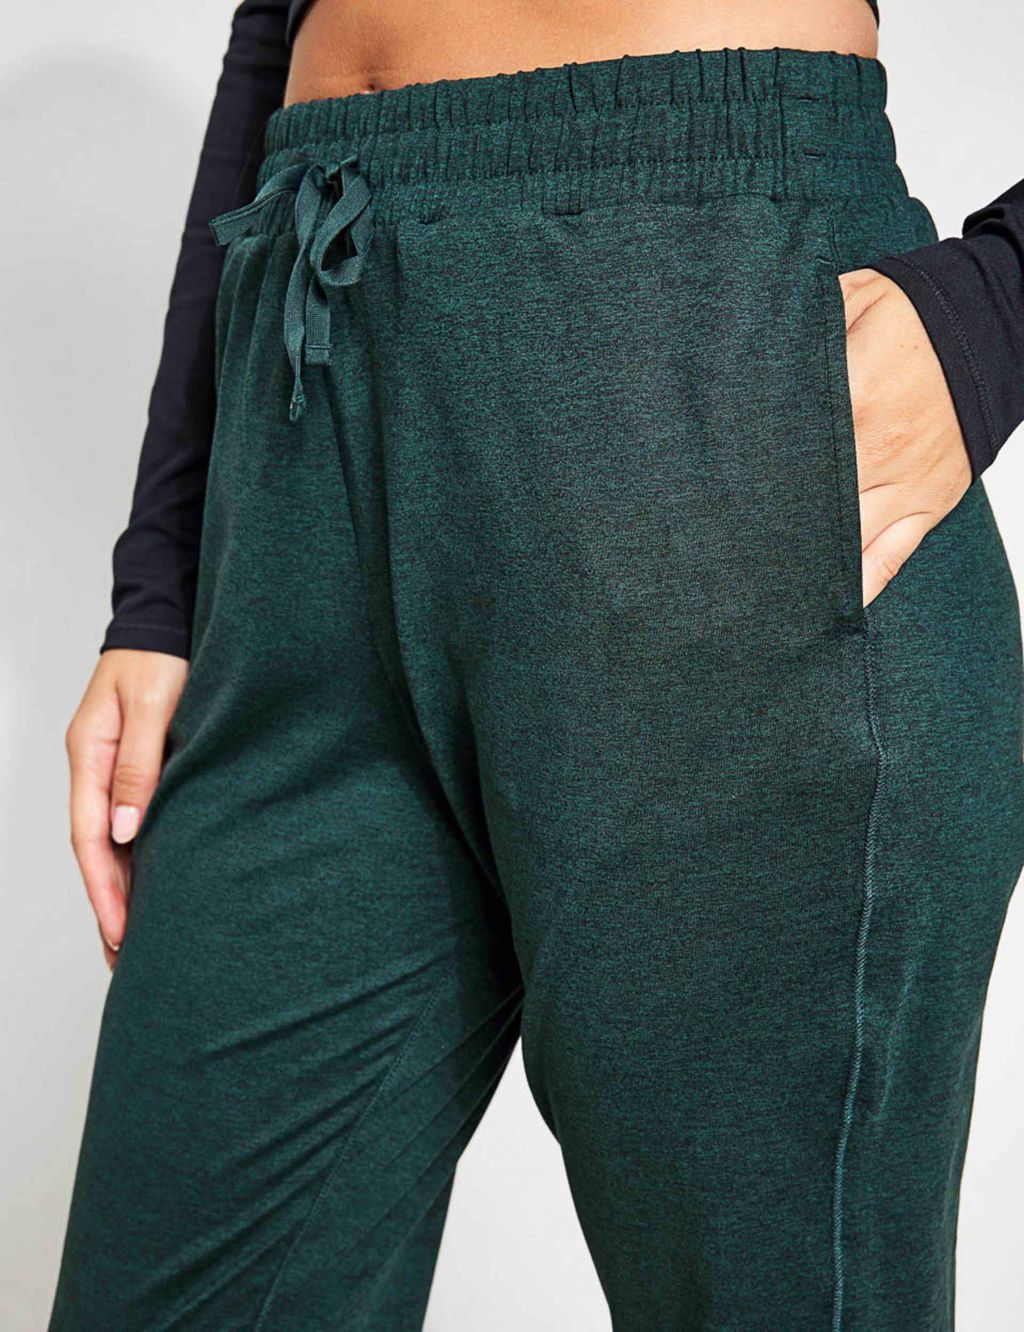 Reset Cuffed Joggers image 4